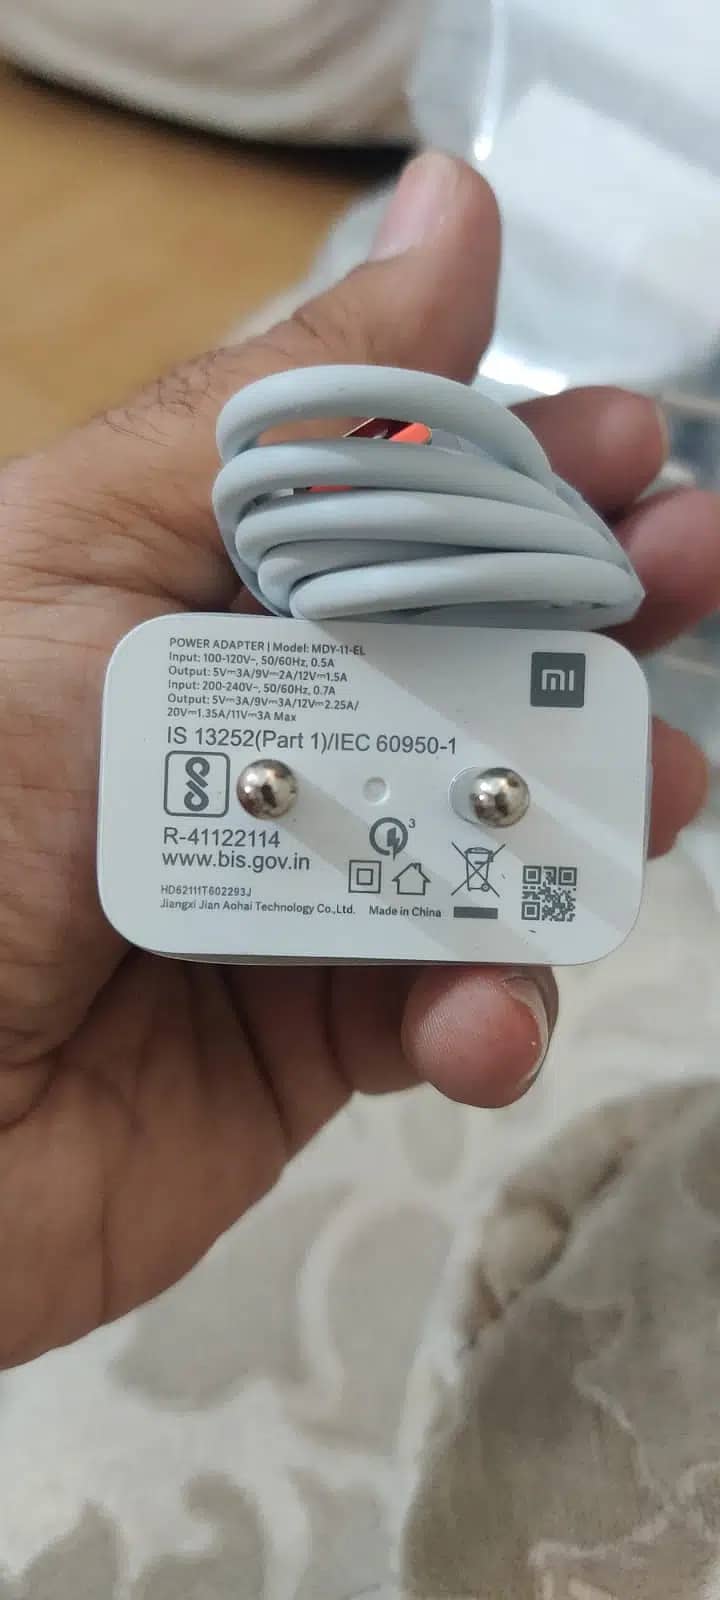 200% Original MI Charger 33W, One Plus Warp, Samsung Mobile Charger 1